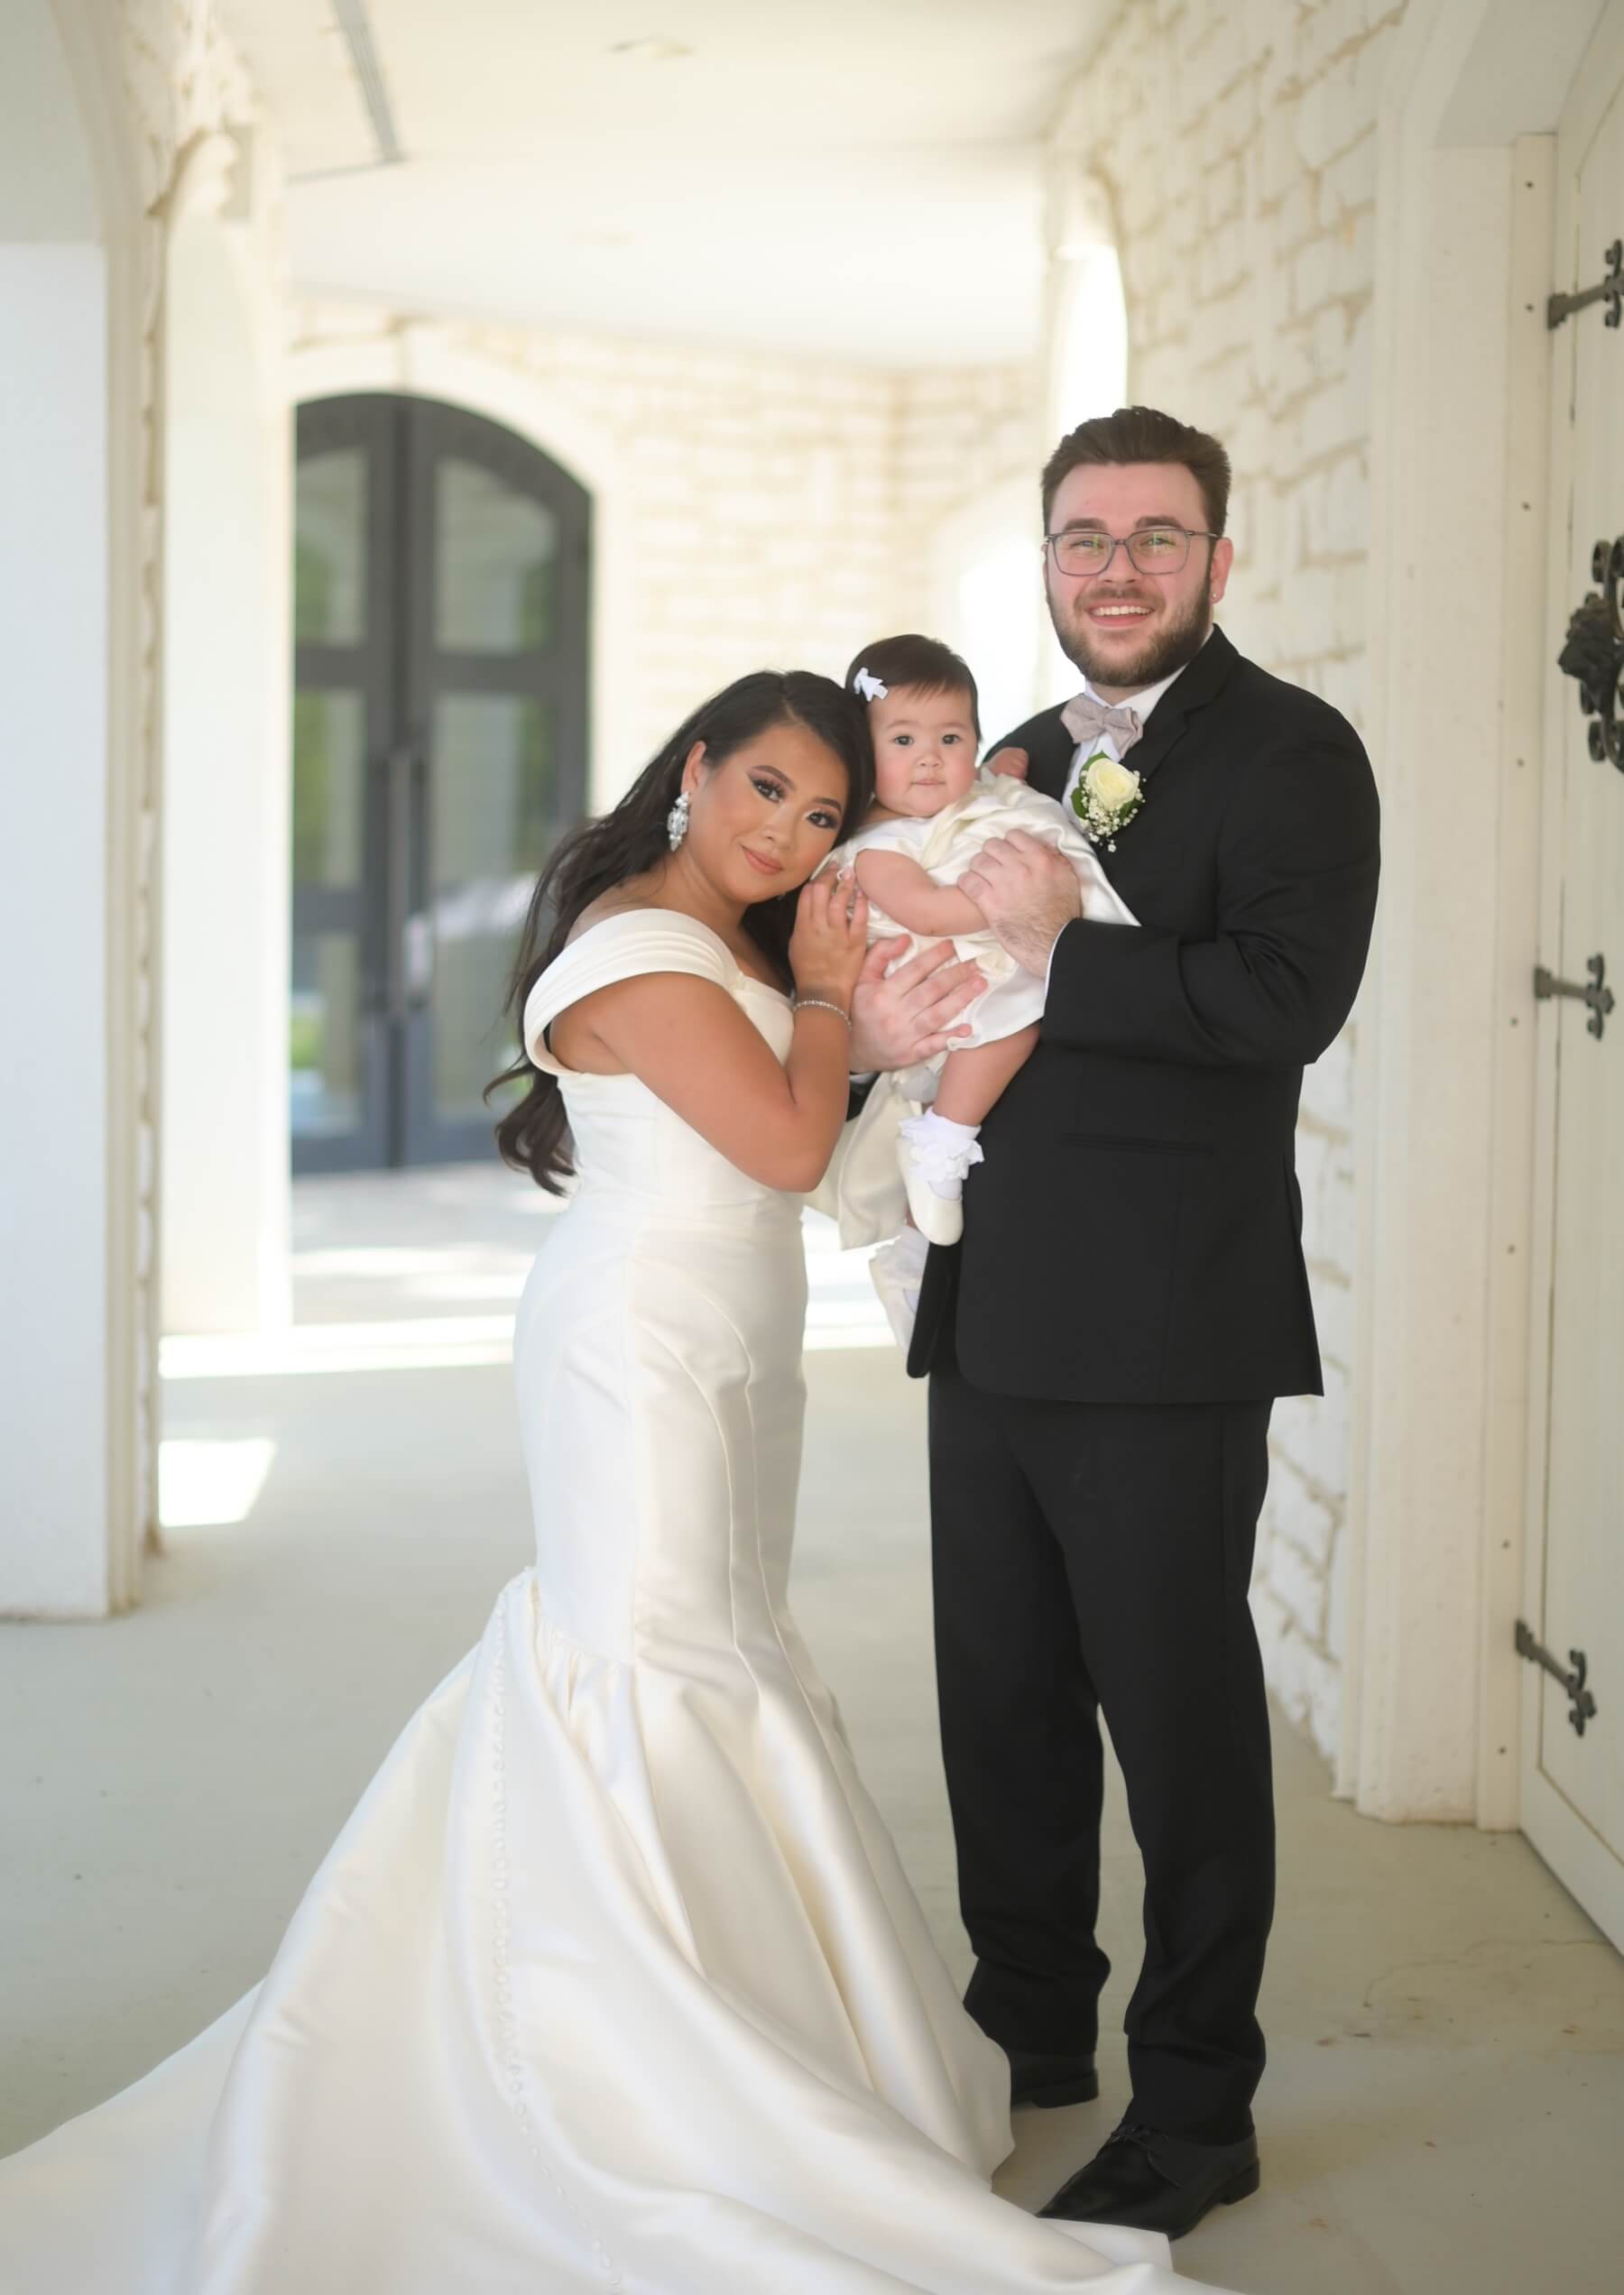 Bride and groom with their baby on their wedding day